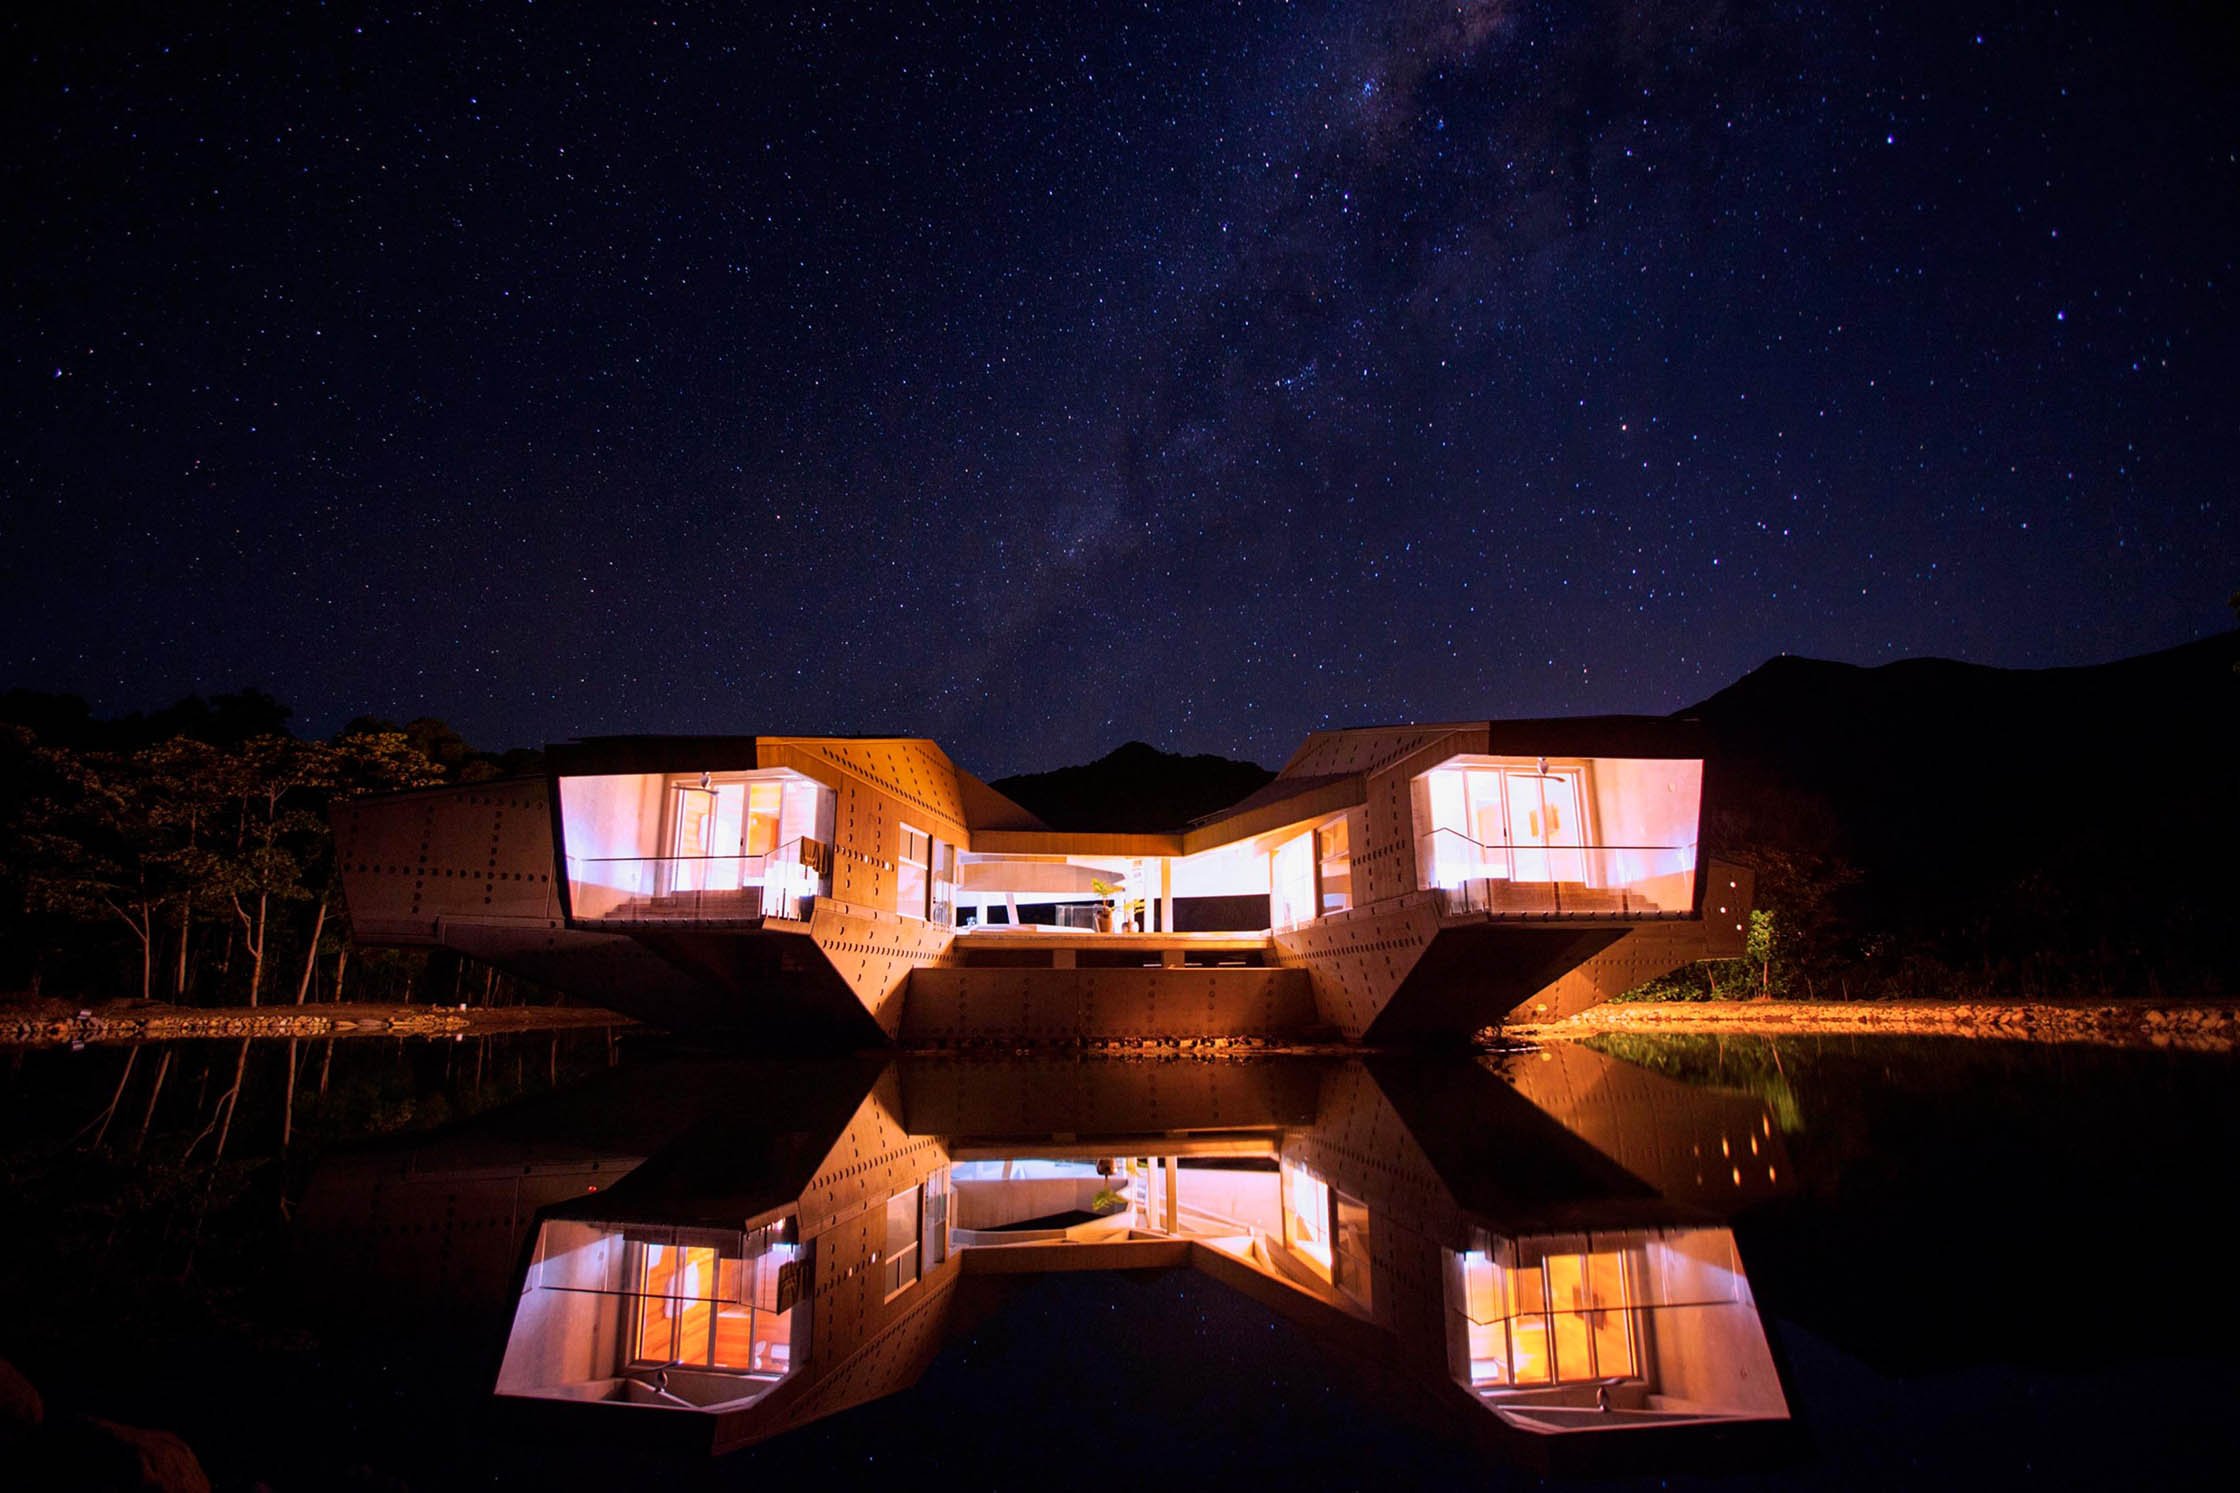 Alkira Resort House lit up at night, away from the pollution of the city with millions of stars in view